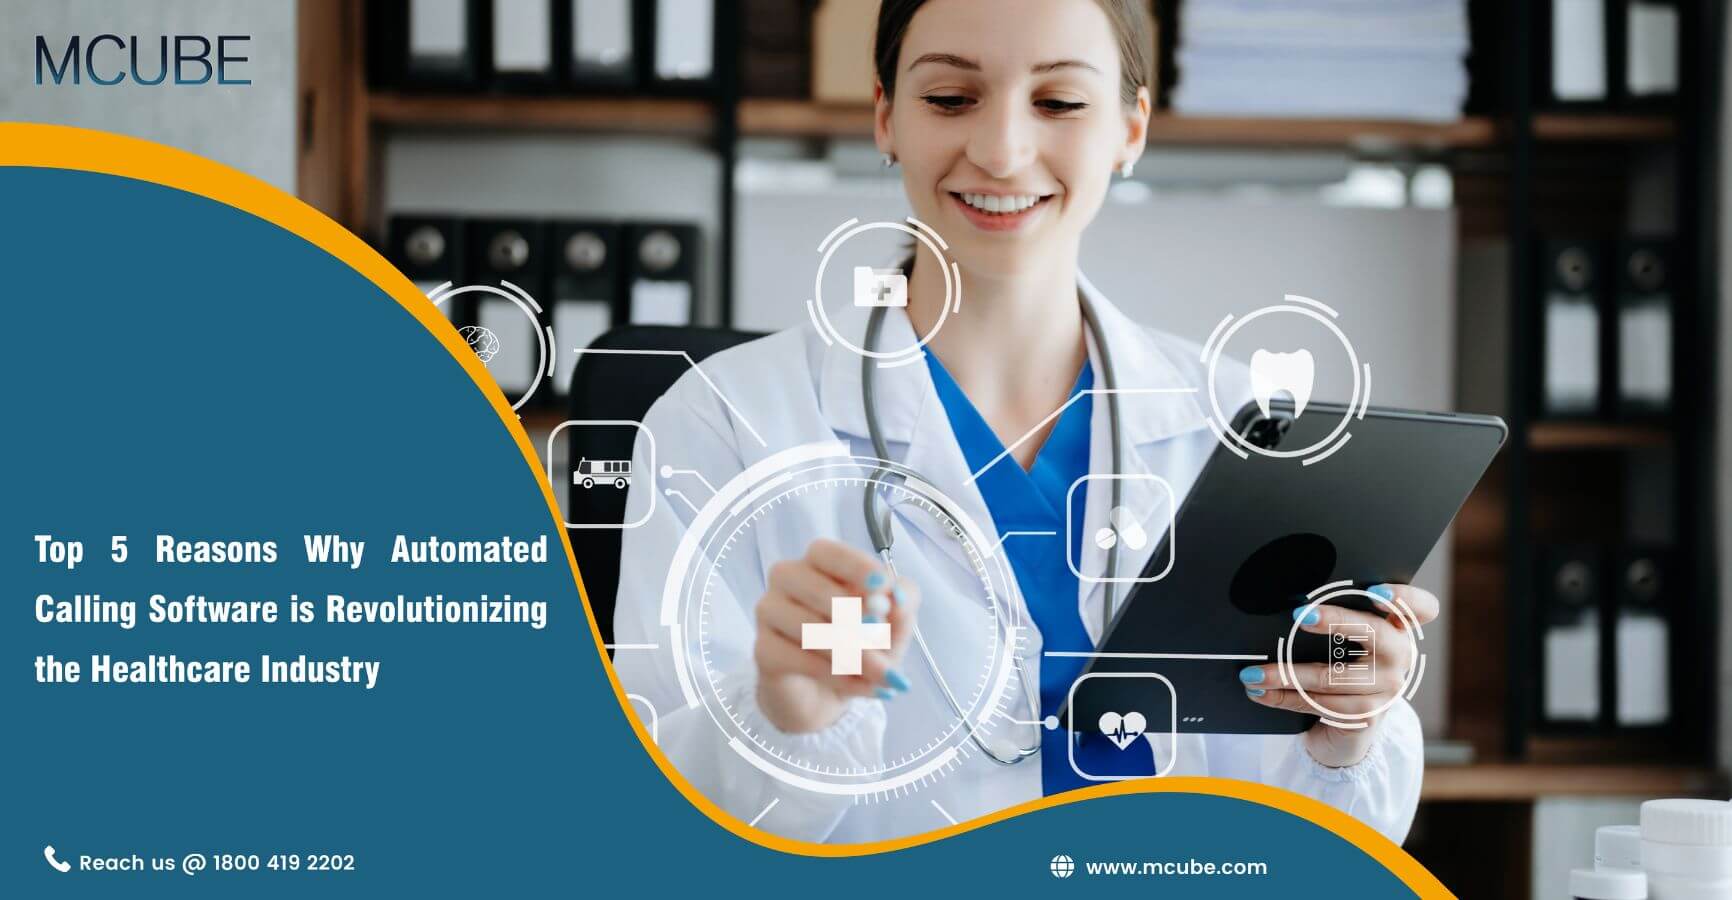 Top 5 Reasons Why Automated Calling Software is Revolutionizing the Healthcare Industry